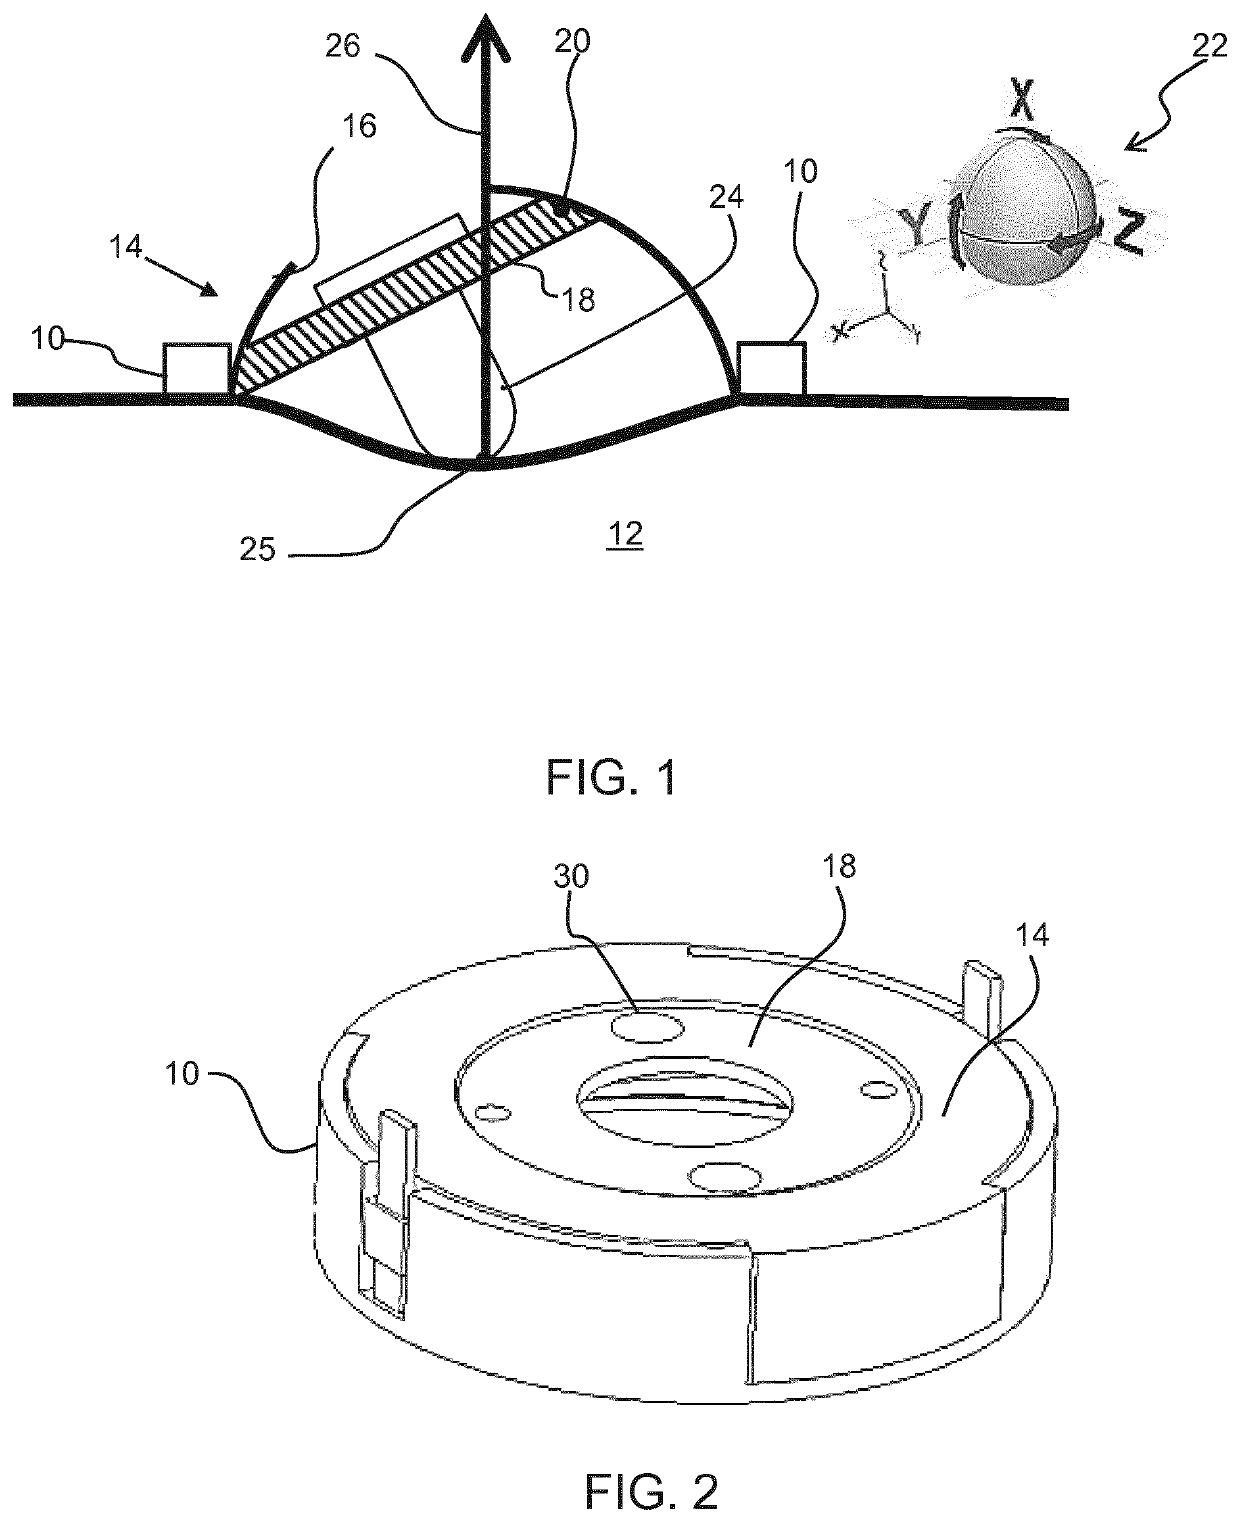 Ultrasound probe holder arrangement using guiding surfaces and pattern recognition